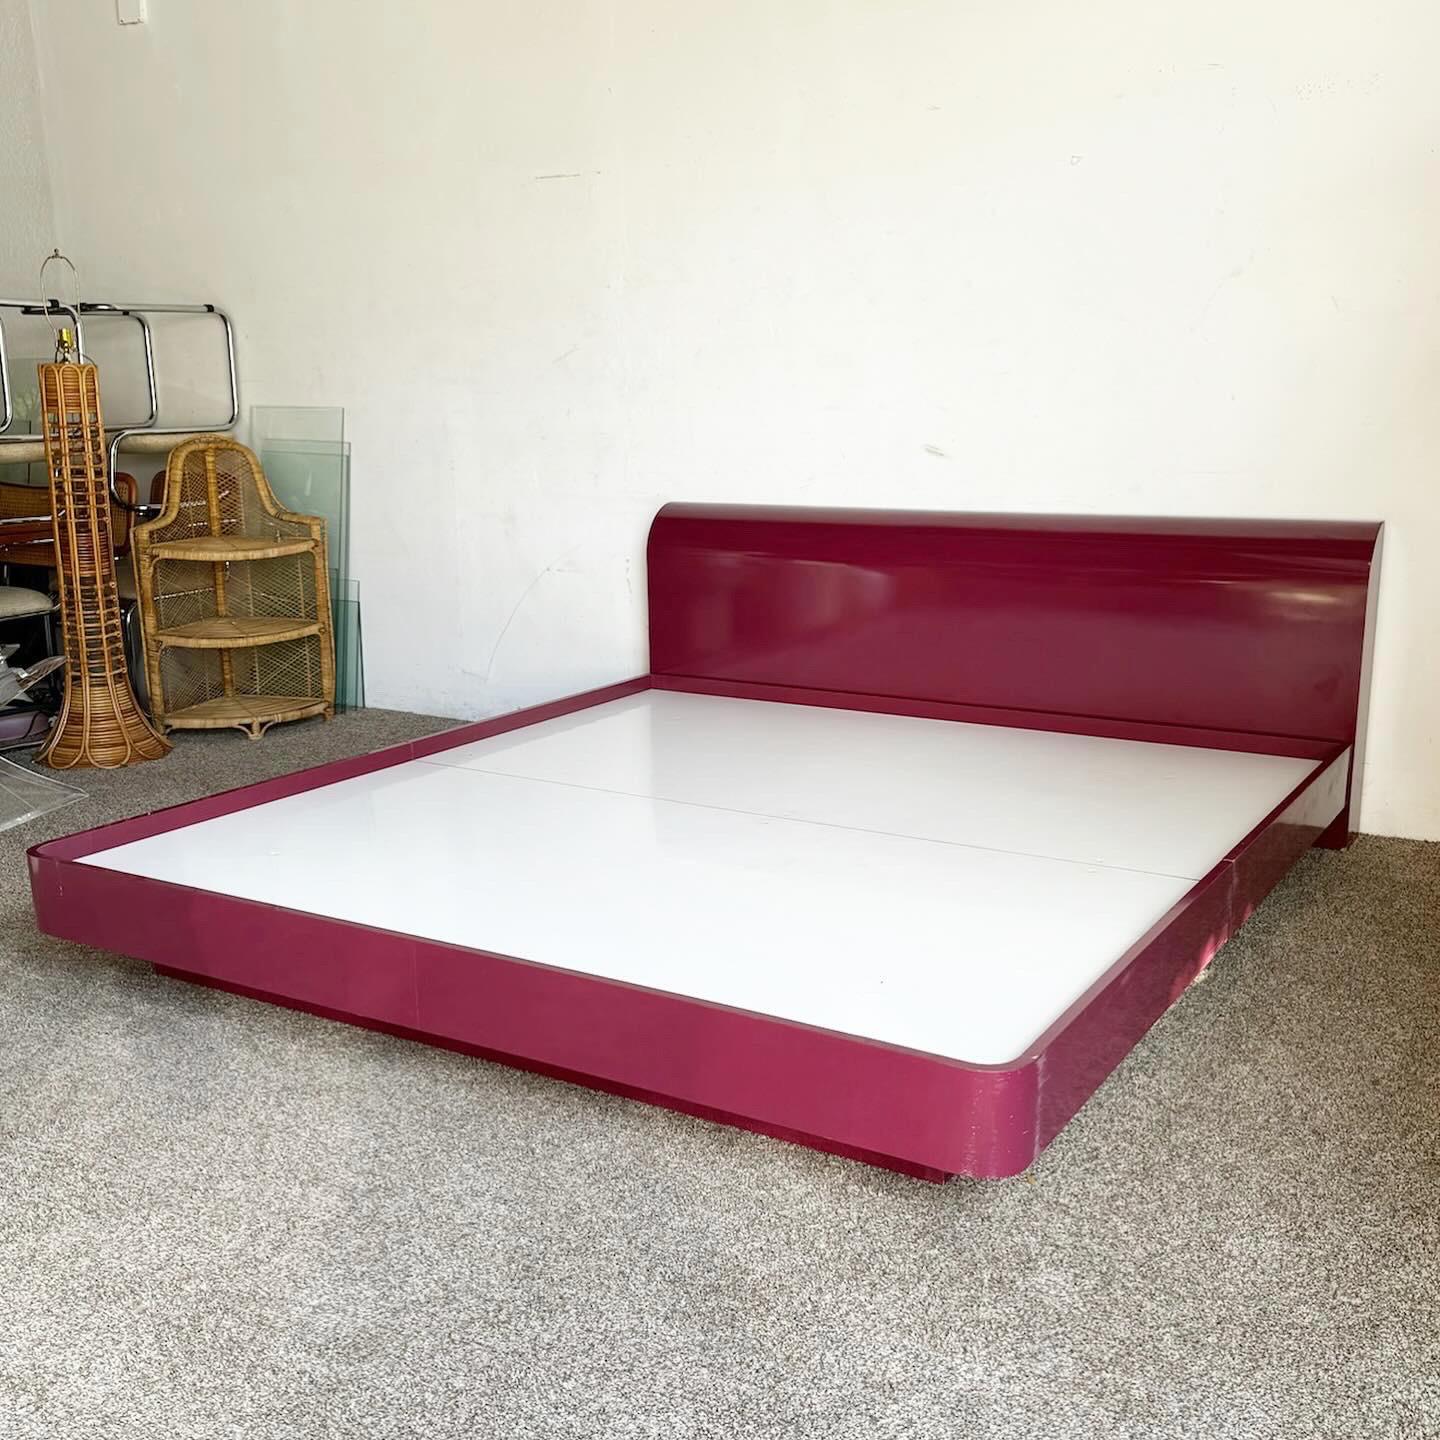 Transform your bedroom with the Postmodern Maroon Lacquer King Bed Set. Enveloped in a vibrant purple lacquer, this bed and headboard set encapsulates the bold, playful aesthetic of the era. Its sleek lines and dynamic color create a functional yet